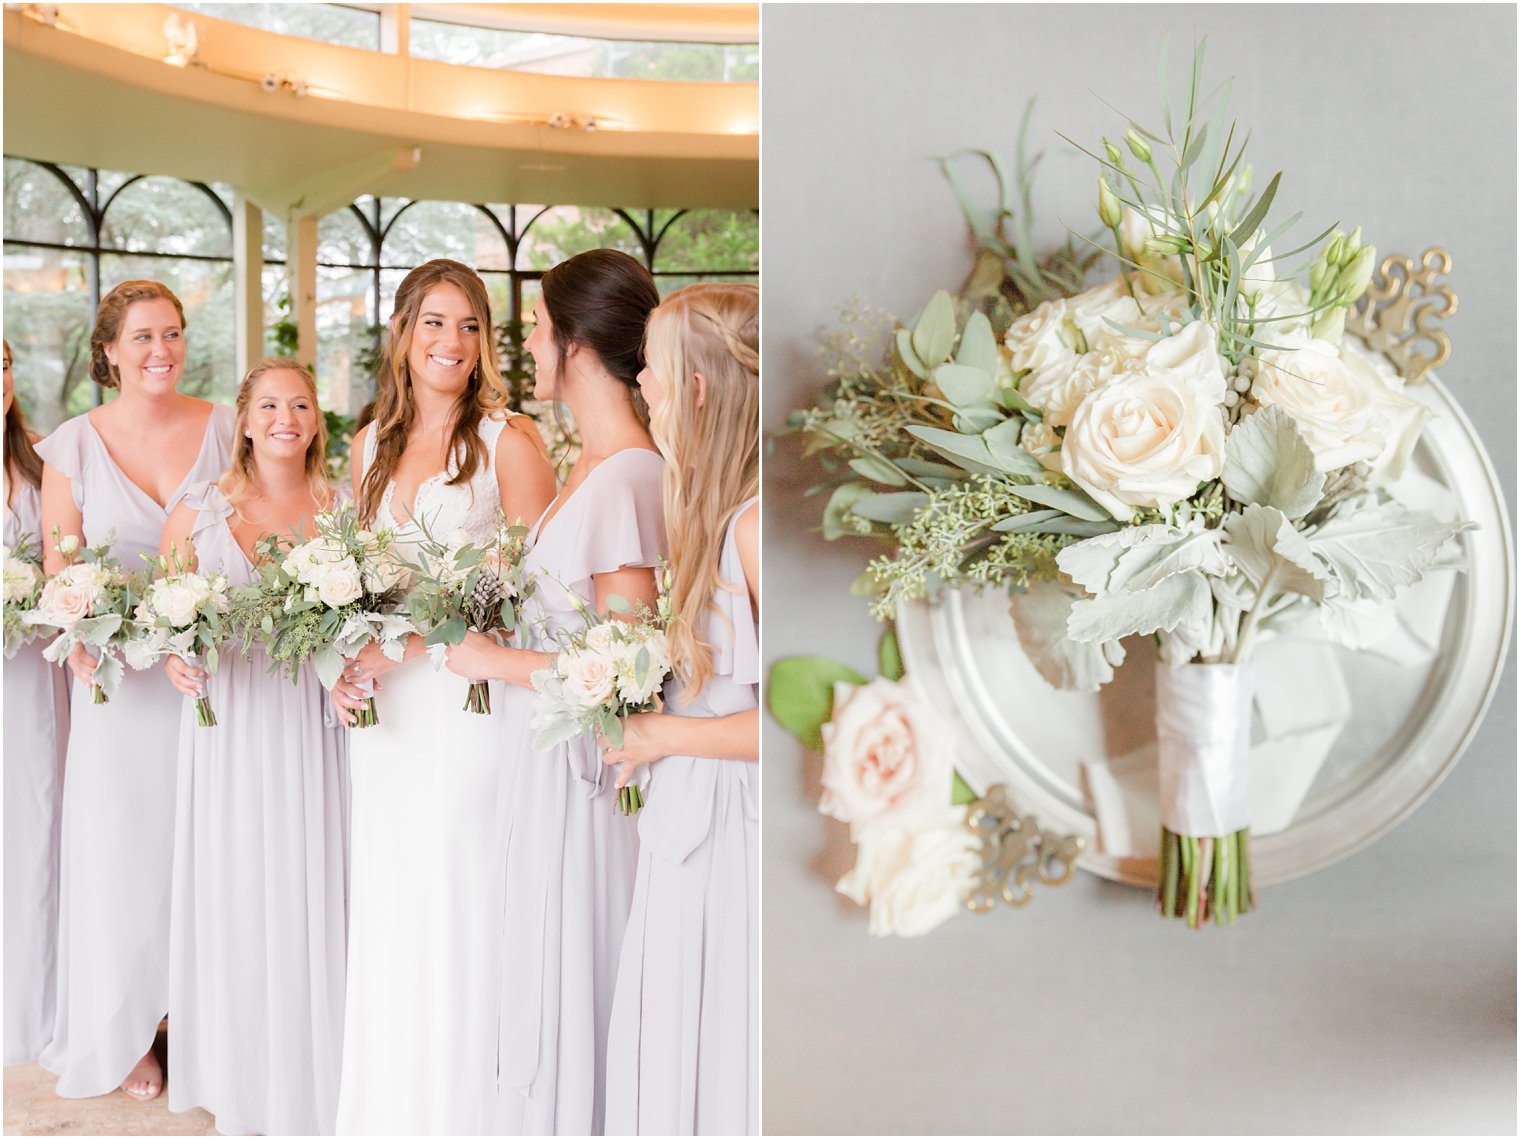 classic ivory and green wedding bouquet by Meghan Pinsky at Jasna Polana